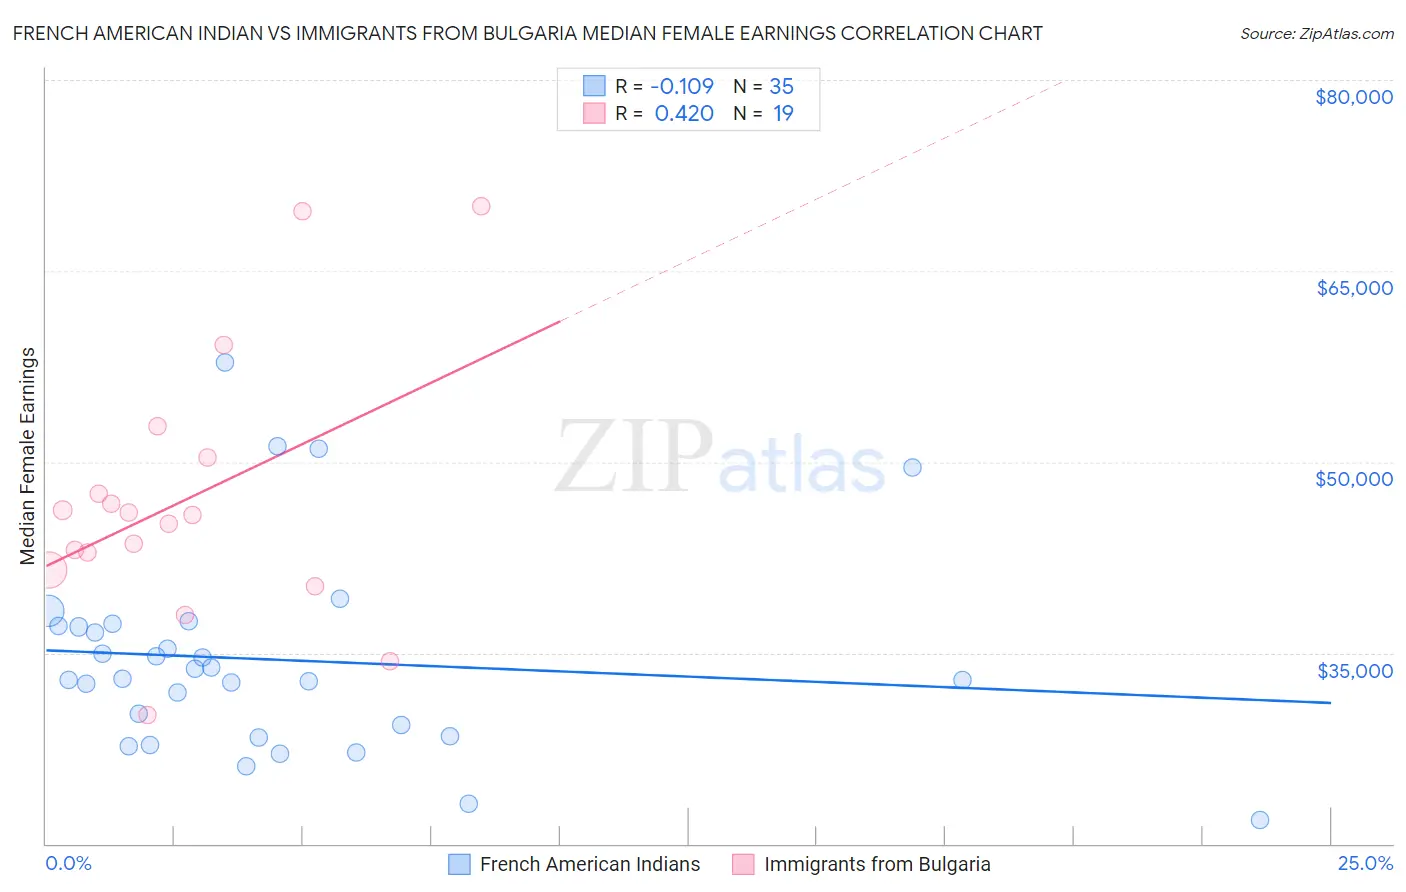 French American Indian vs Immigrants from Bulgaria Median Female Earnings